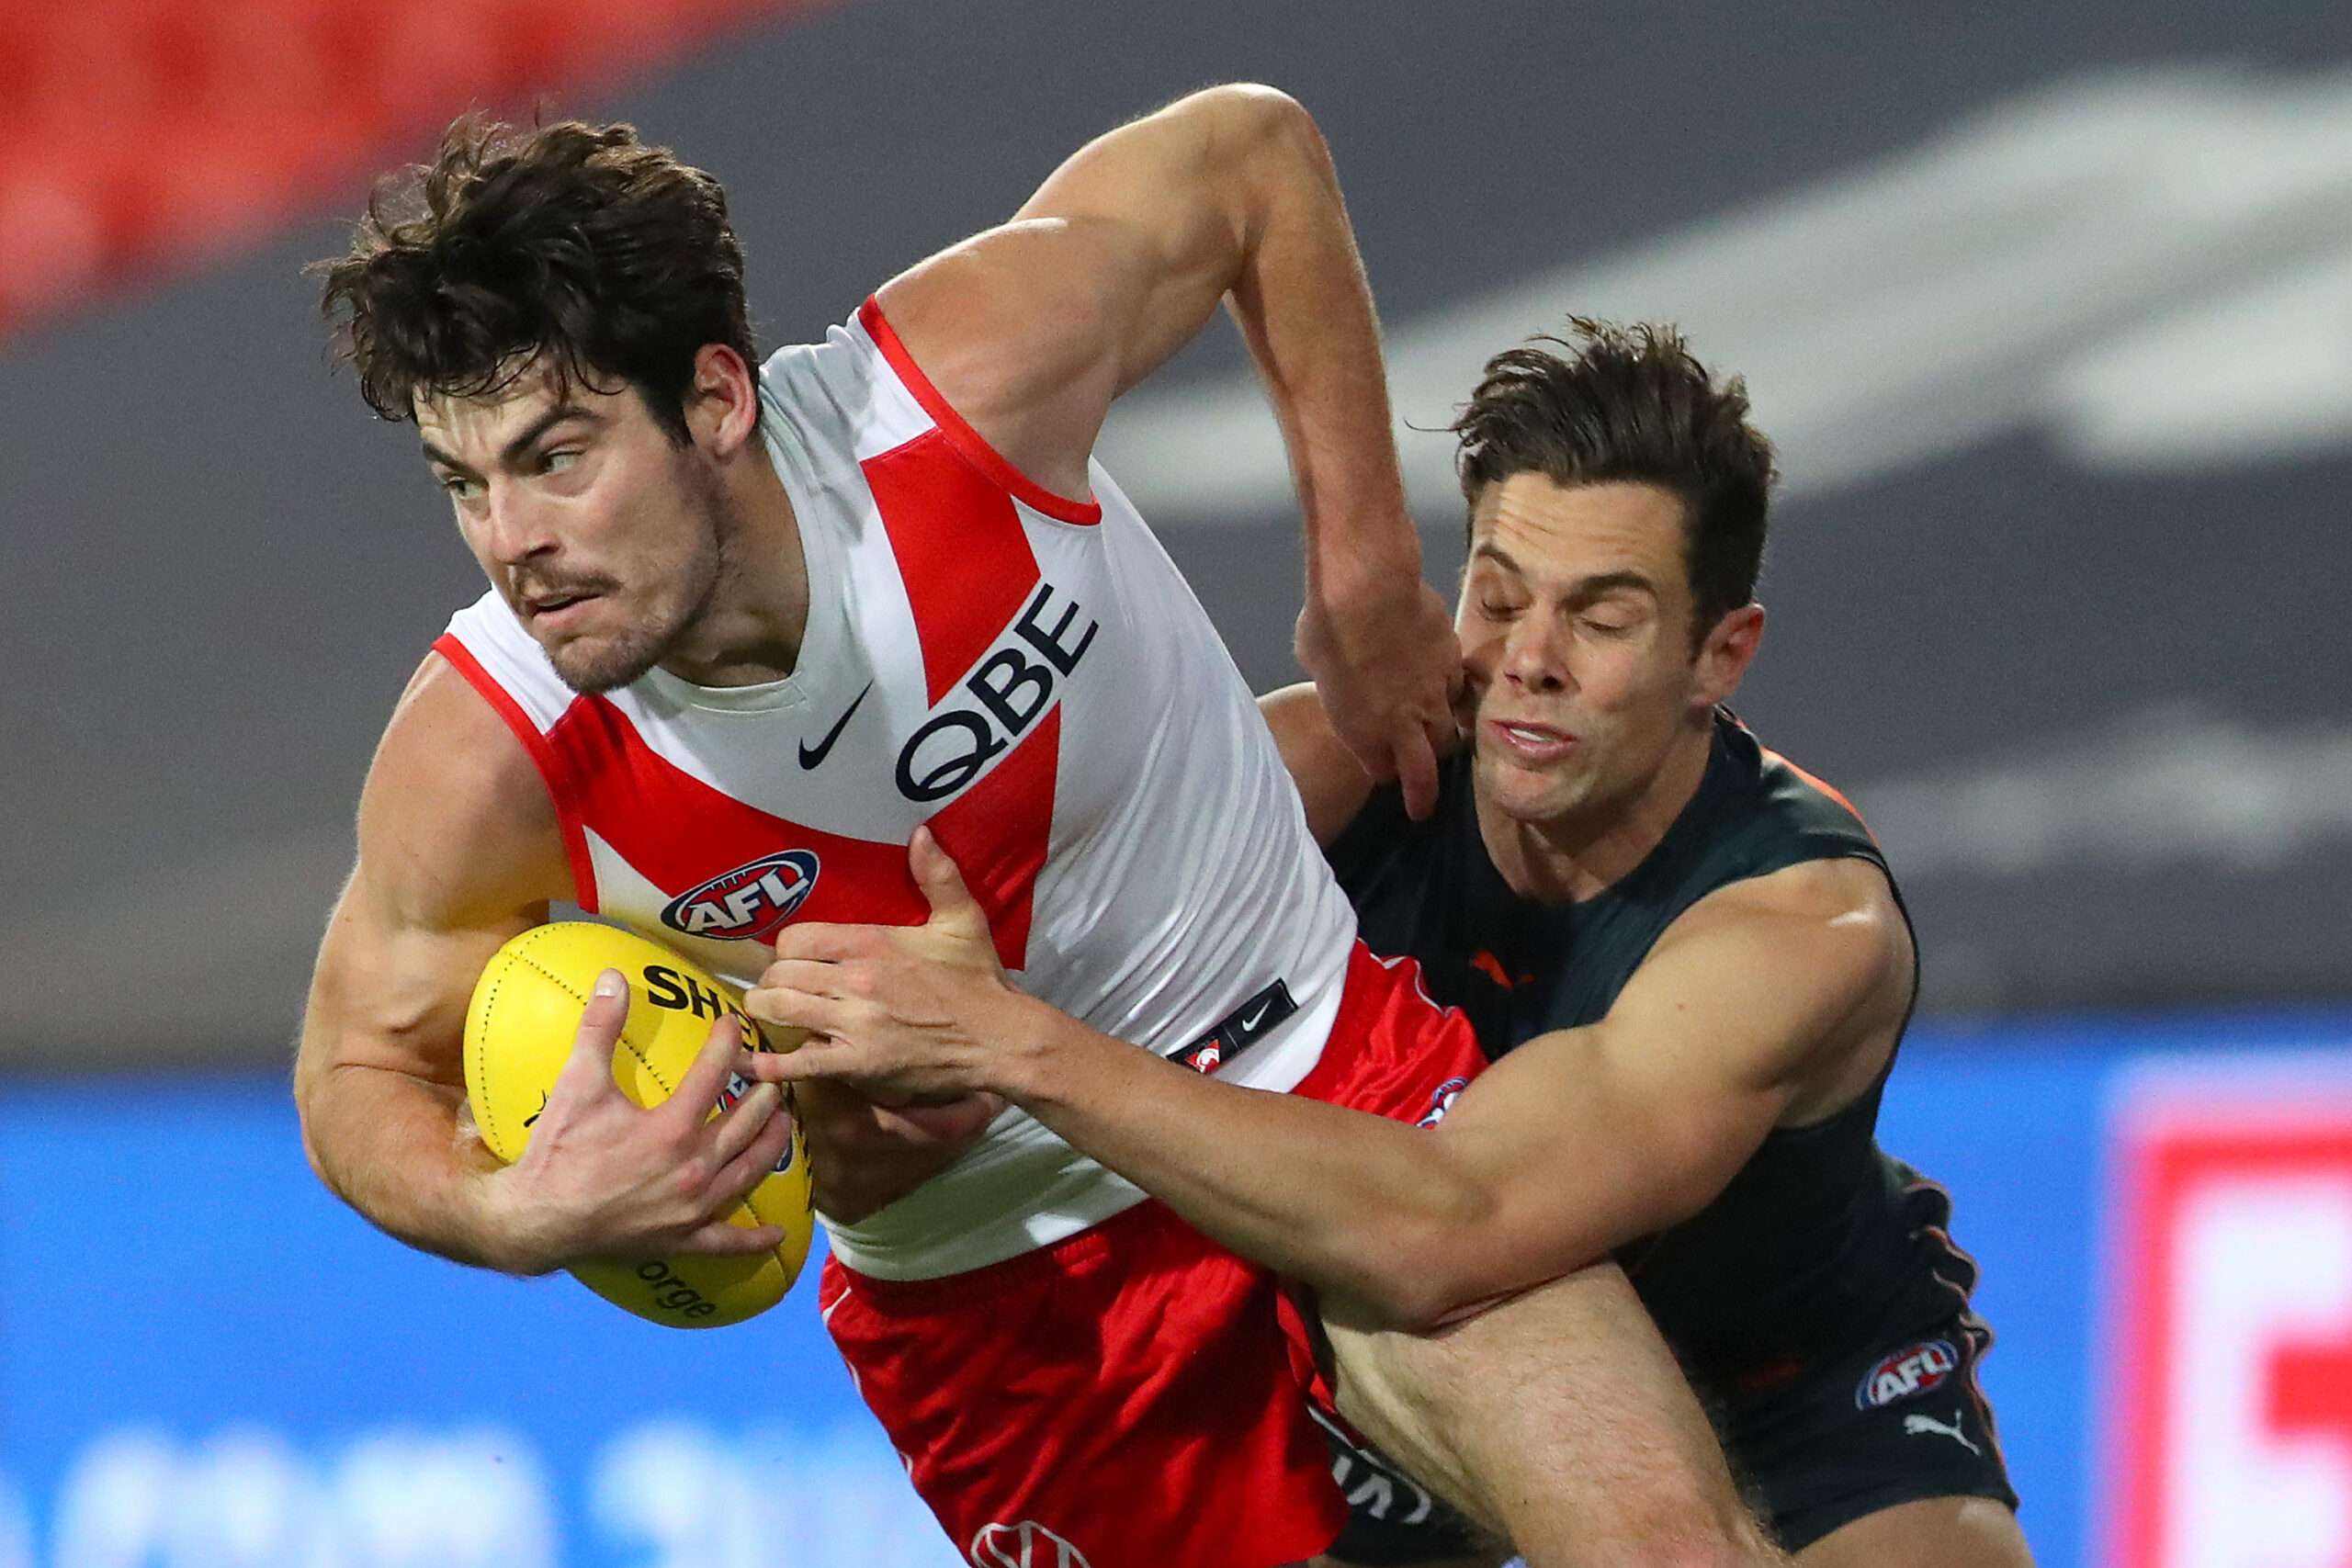 DONE DEAL: Former Swan links up with Blues - AFL News - Zero Hanger